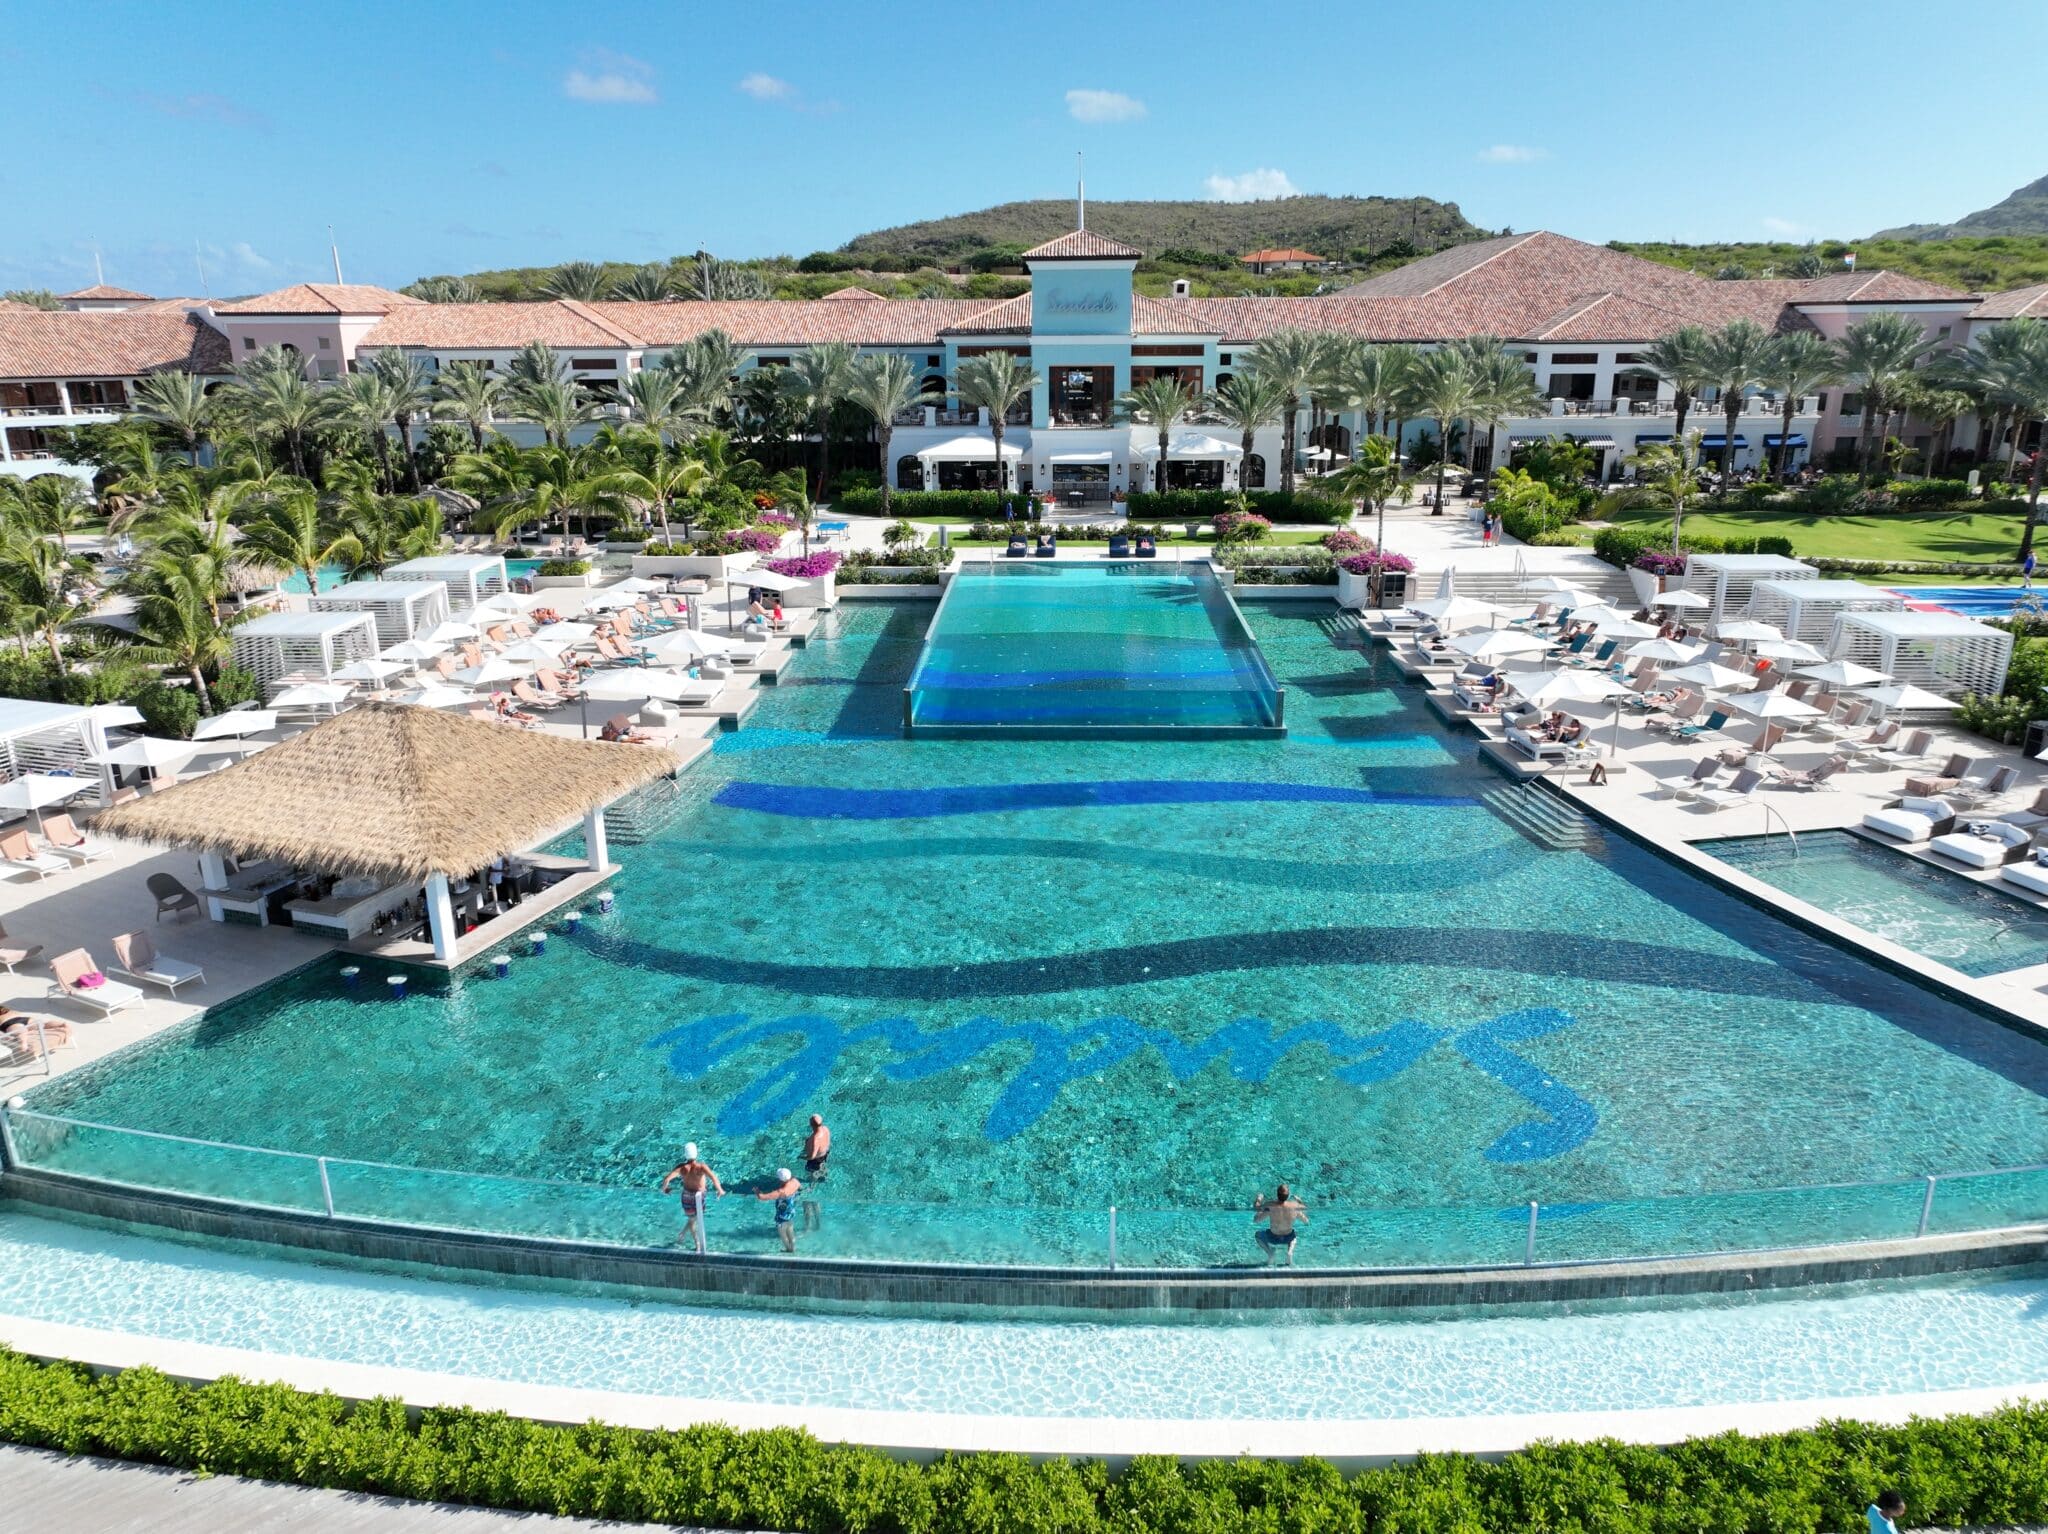 The Sandals Curacao infinity pool and swim up bar